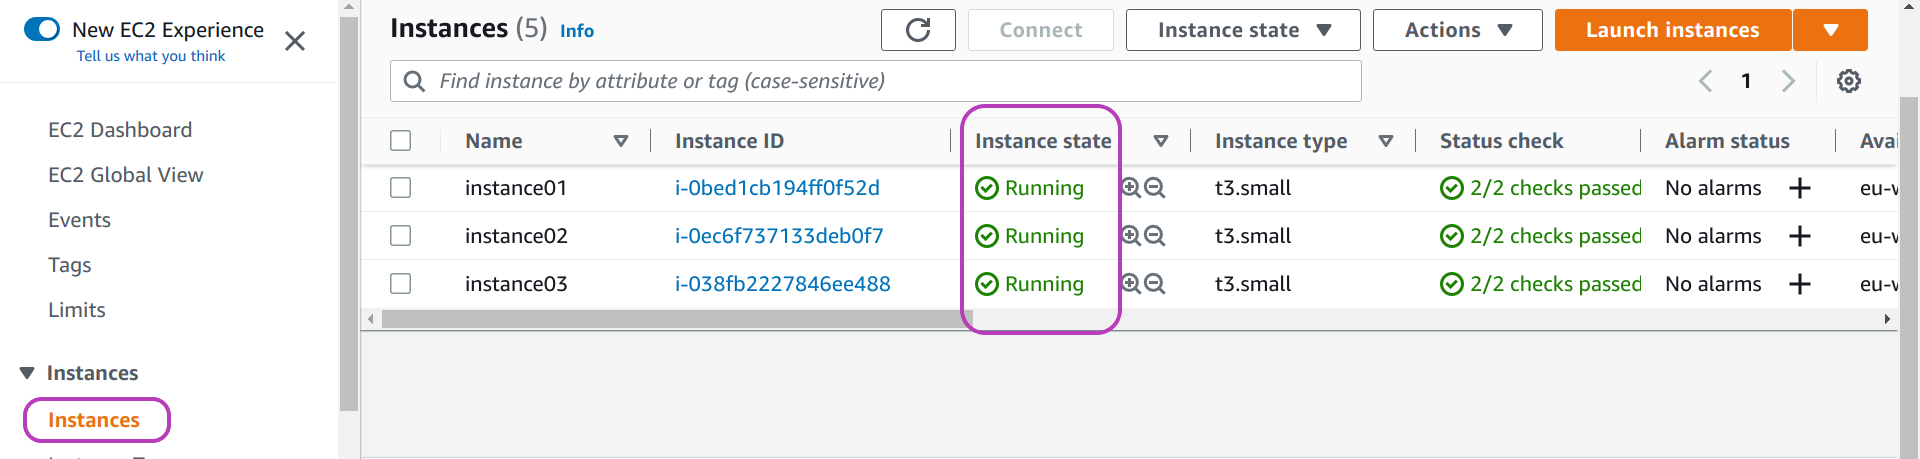 Screenshot of AWS Console EC2 Instances page in a browser showing the state, Running, of three instances previously created, circled.